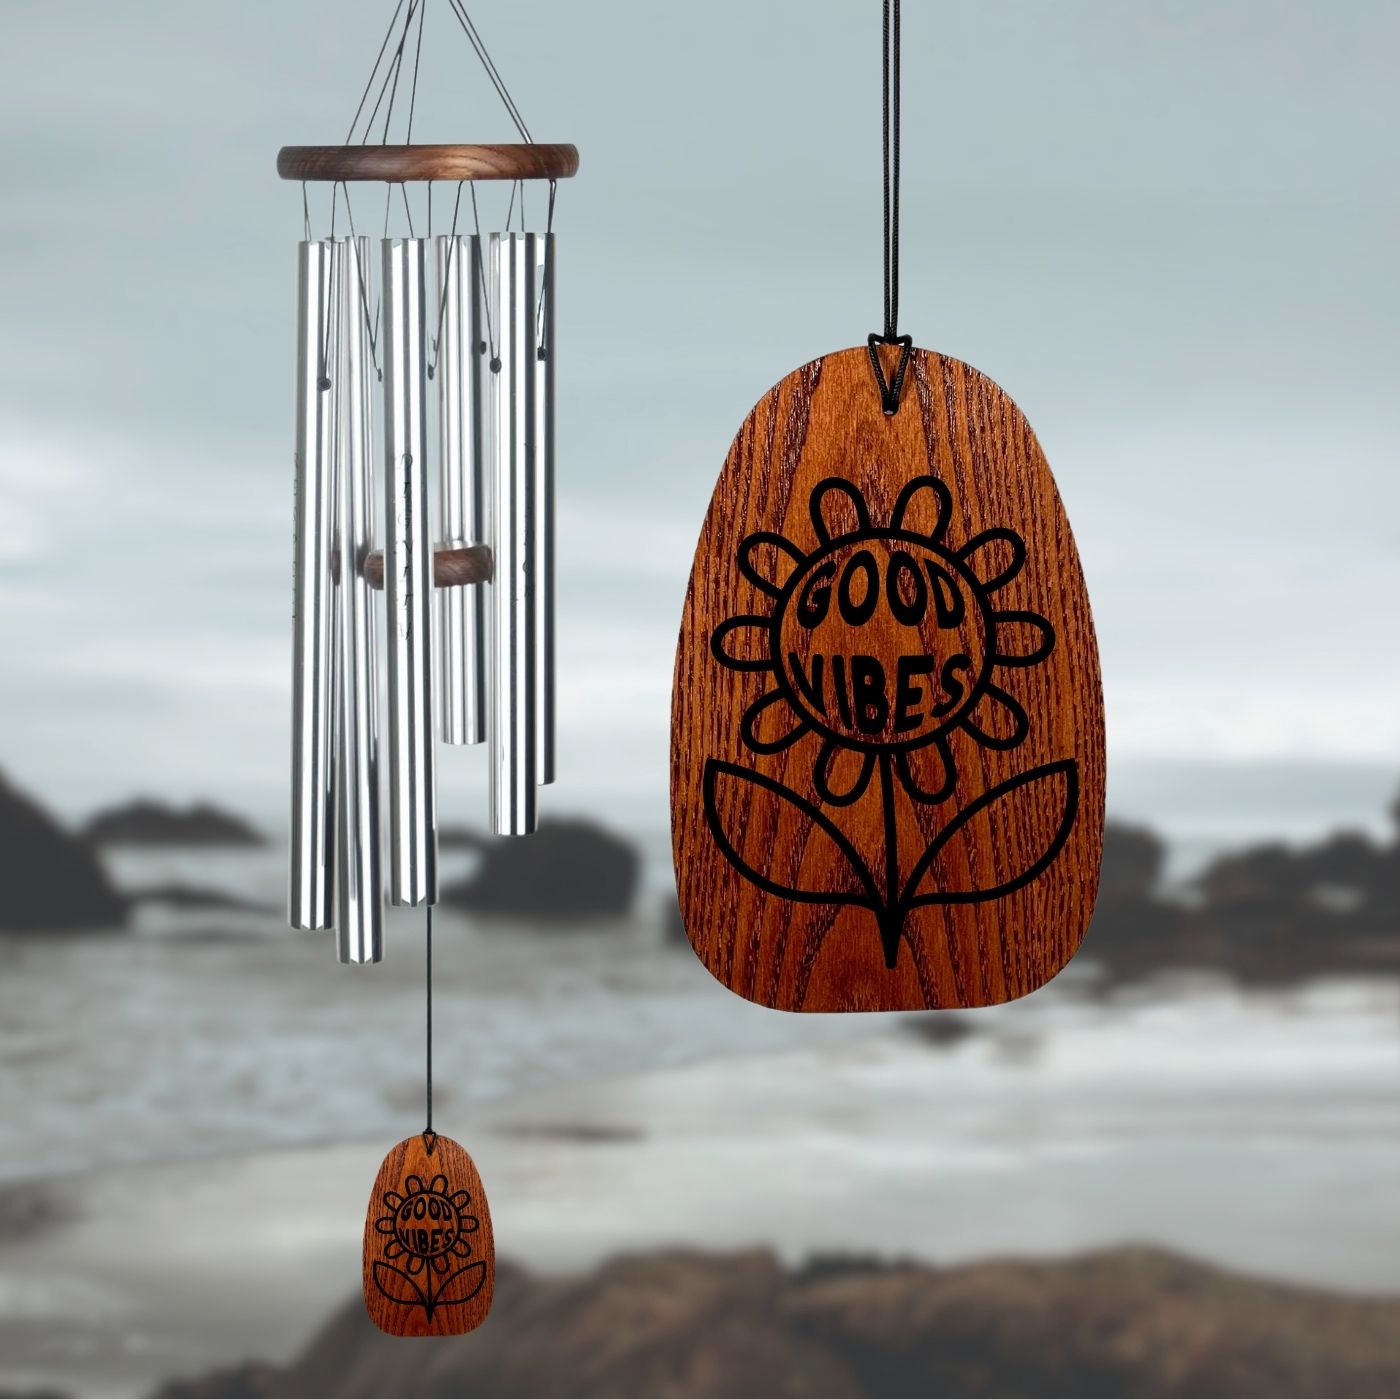 Affirmation Virtues and Good Vibes Wind Chime - Engravable Sail